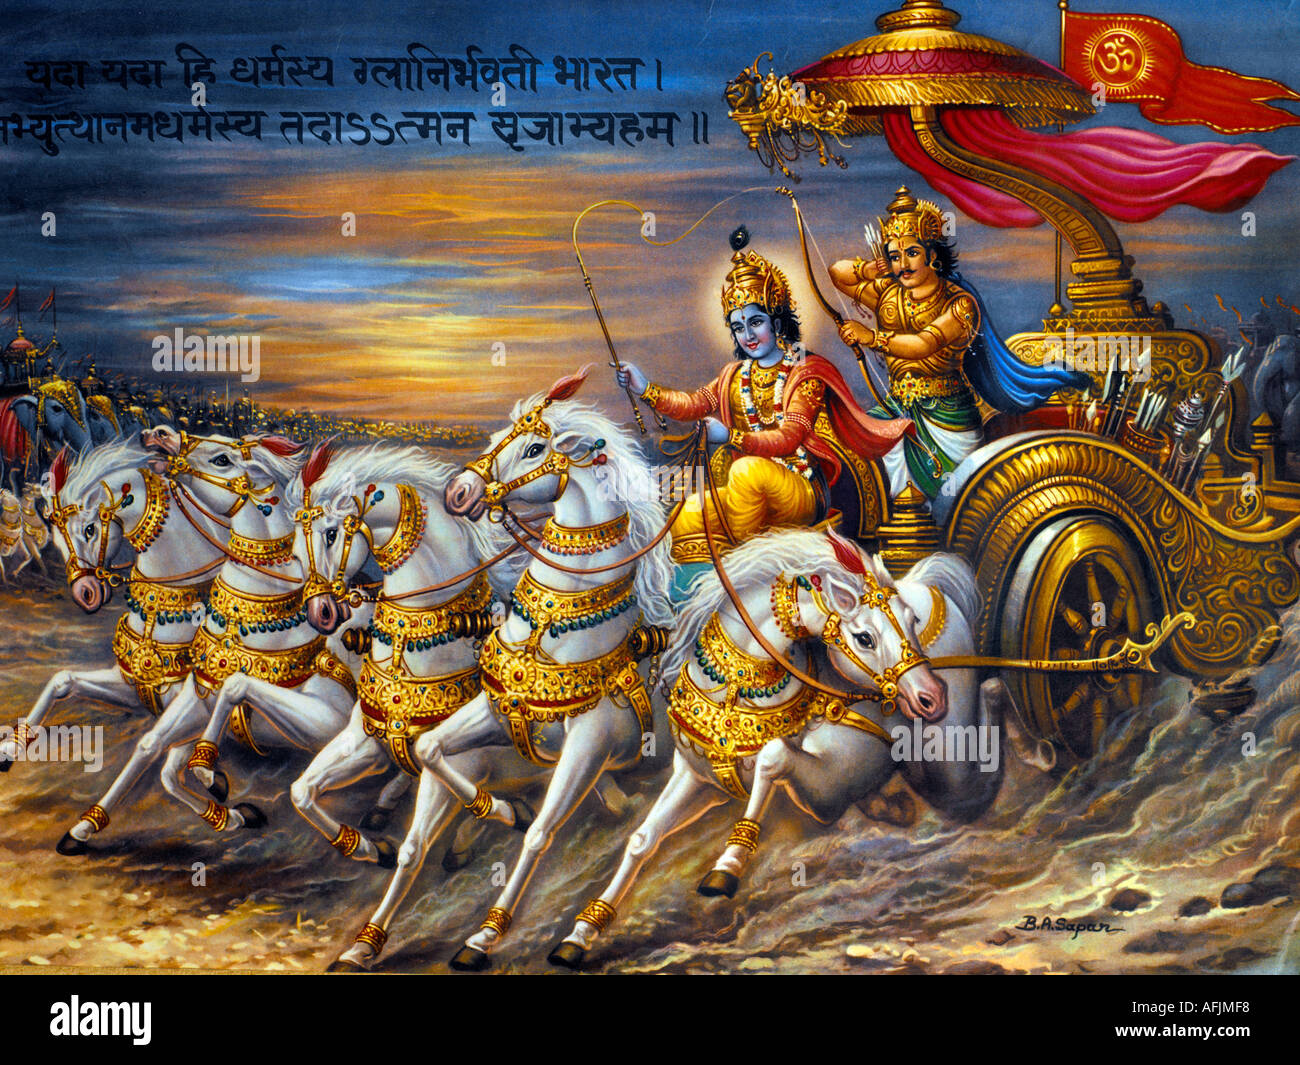 Krishna arjun High Resolution Stock Photography and Images   Alamy 1300x1065